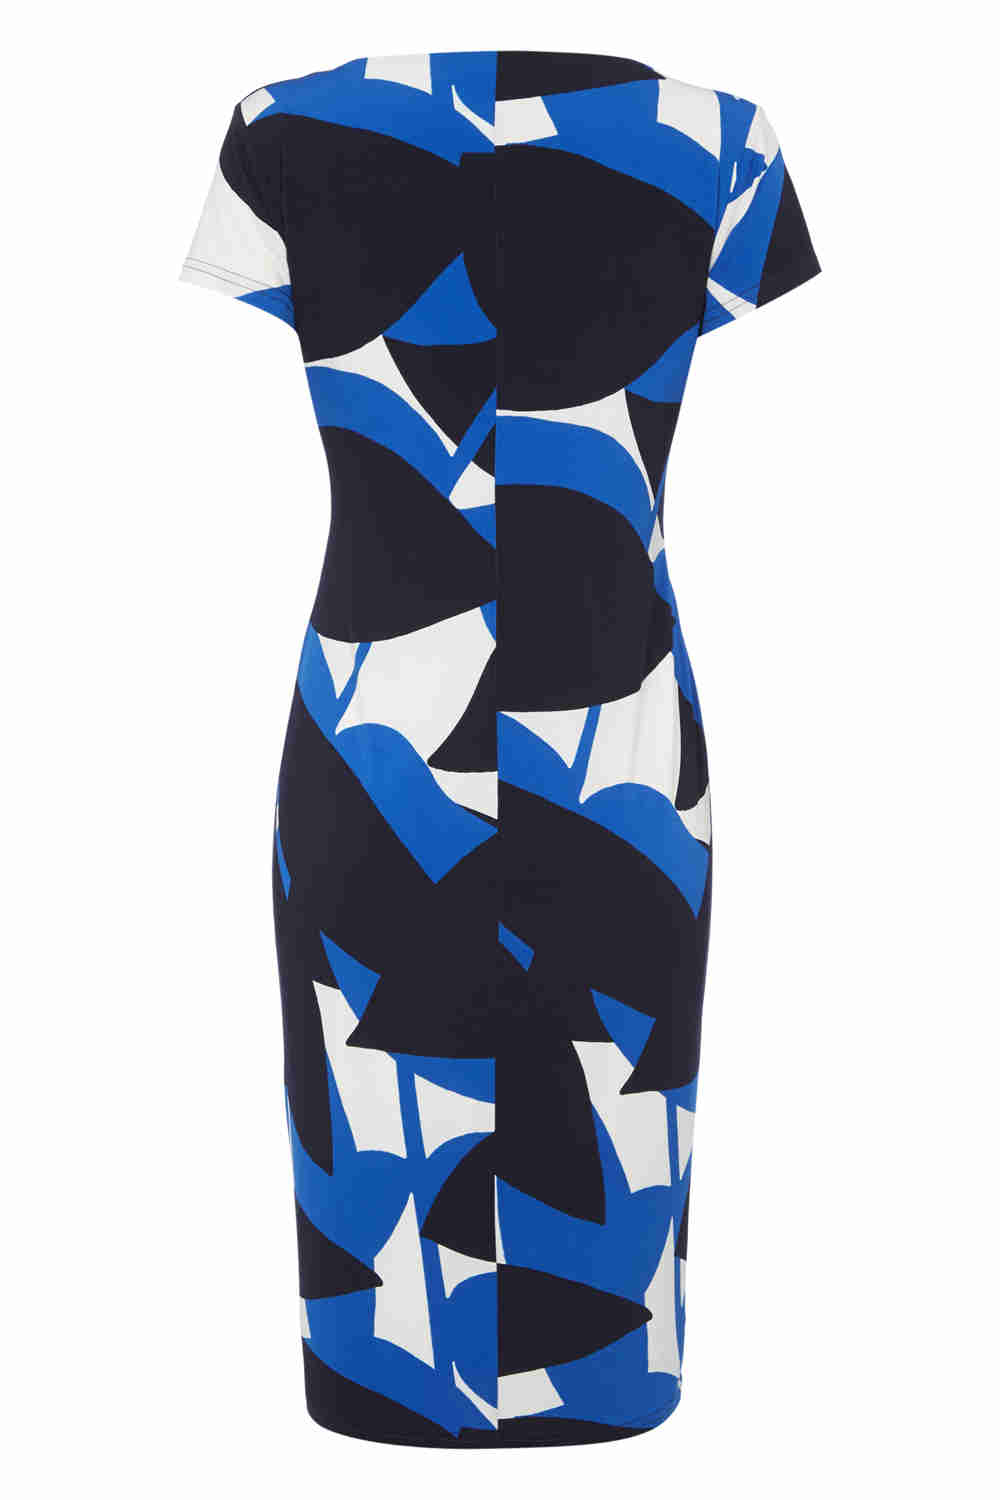 Blue Abstract Leaf Print Jersey Dress, Image 5 of 5